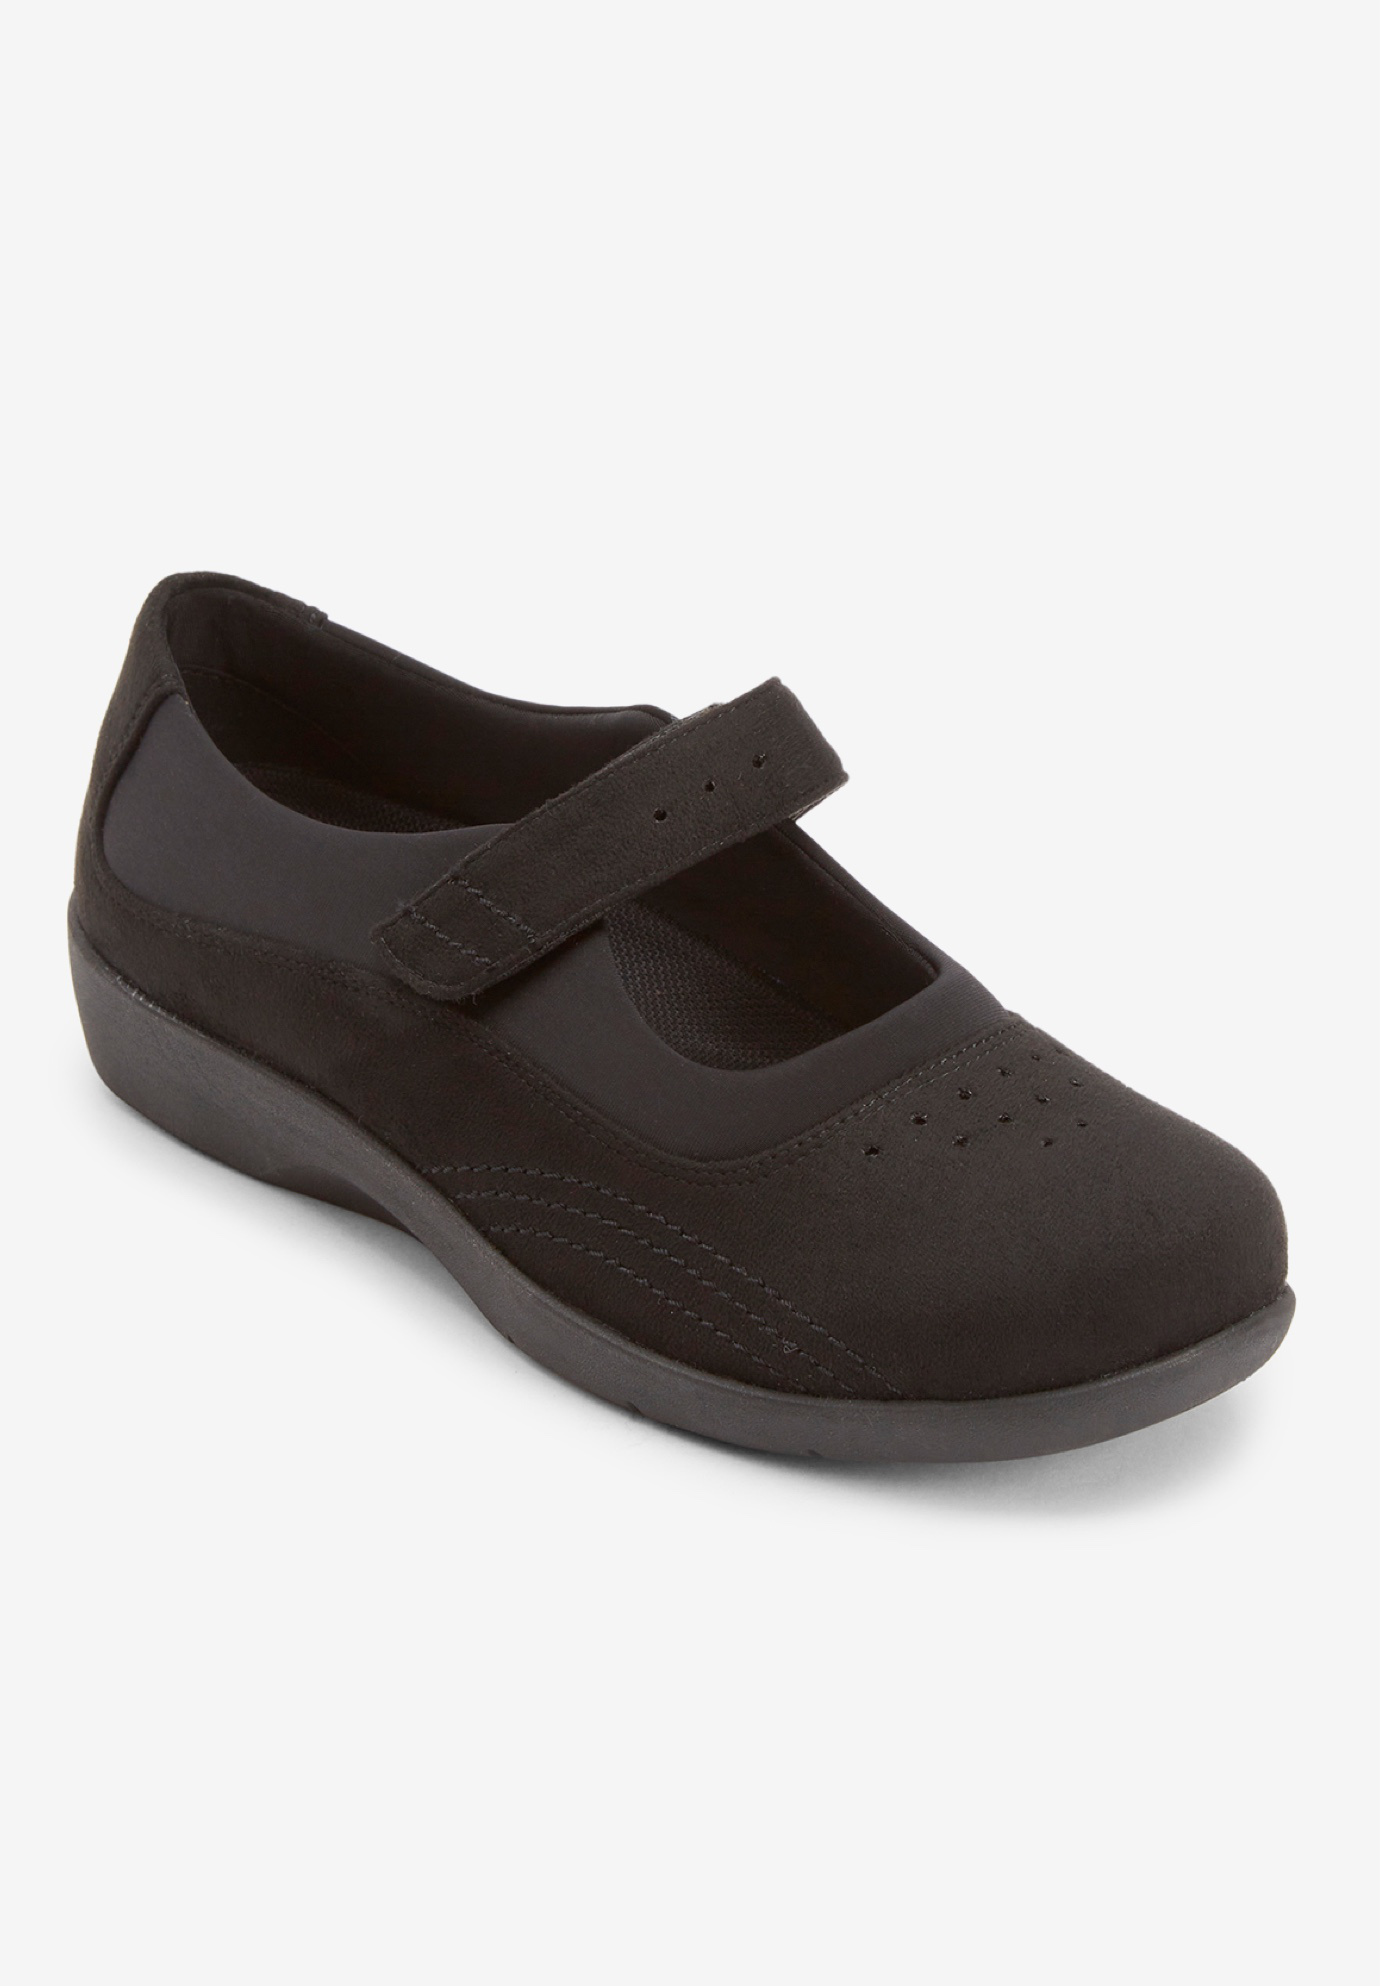 The Aliana Flat by Comfortview, 